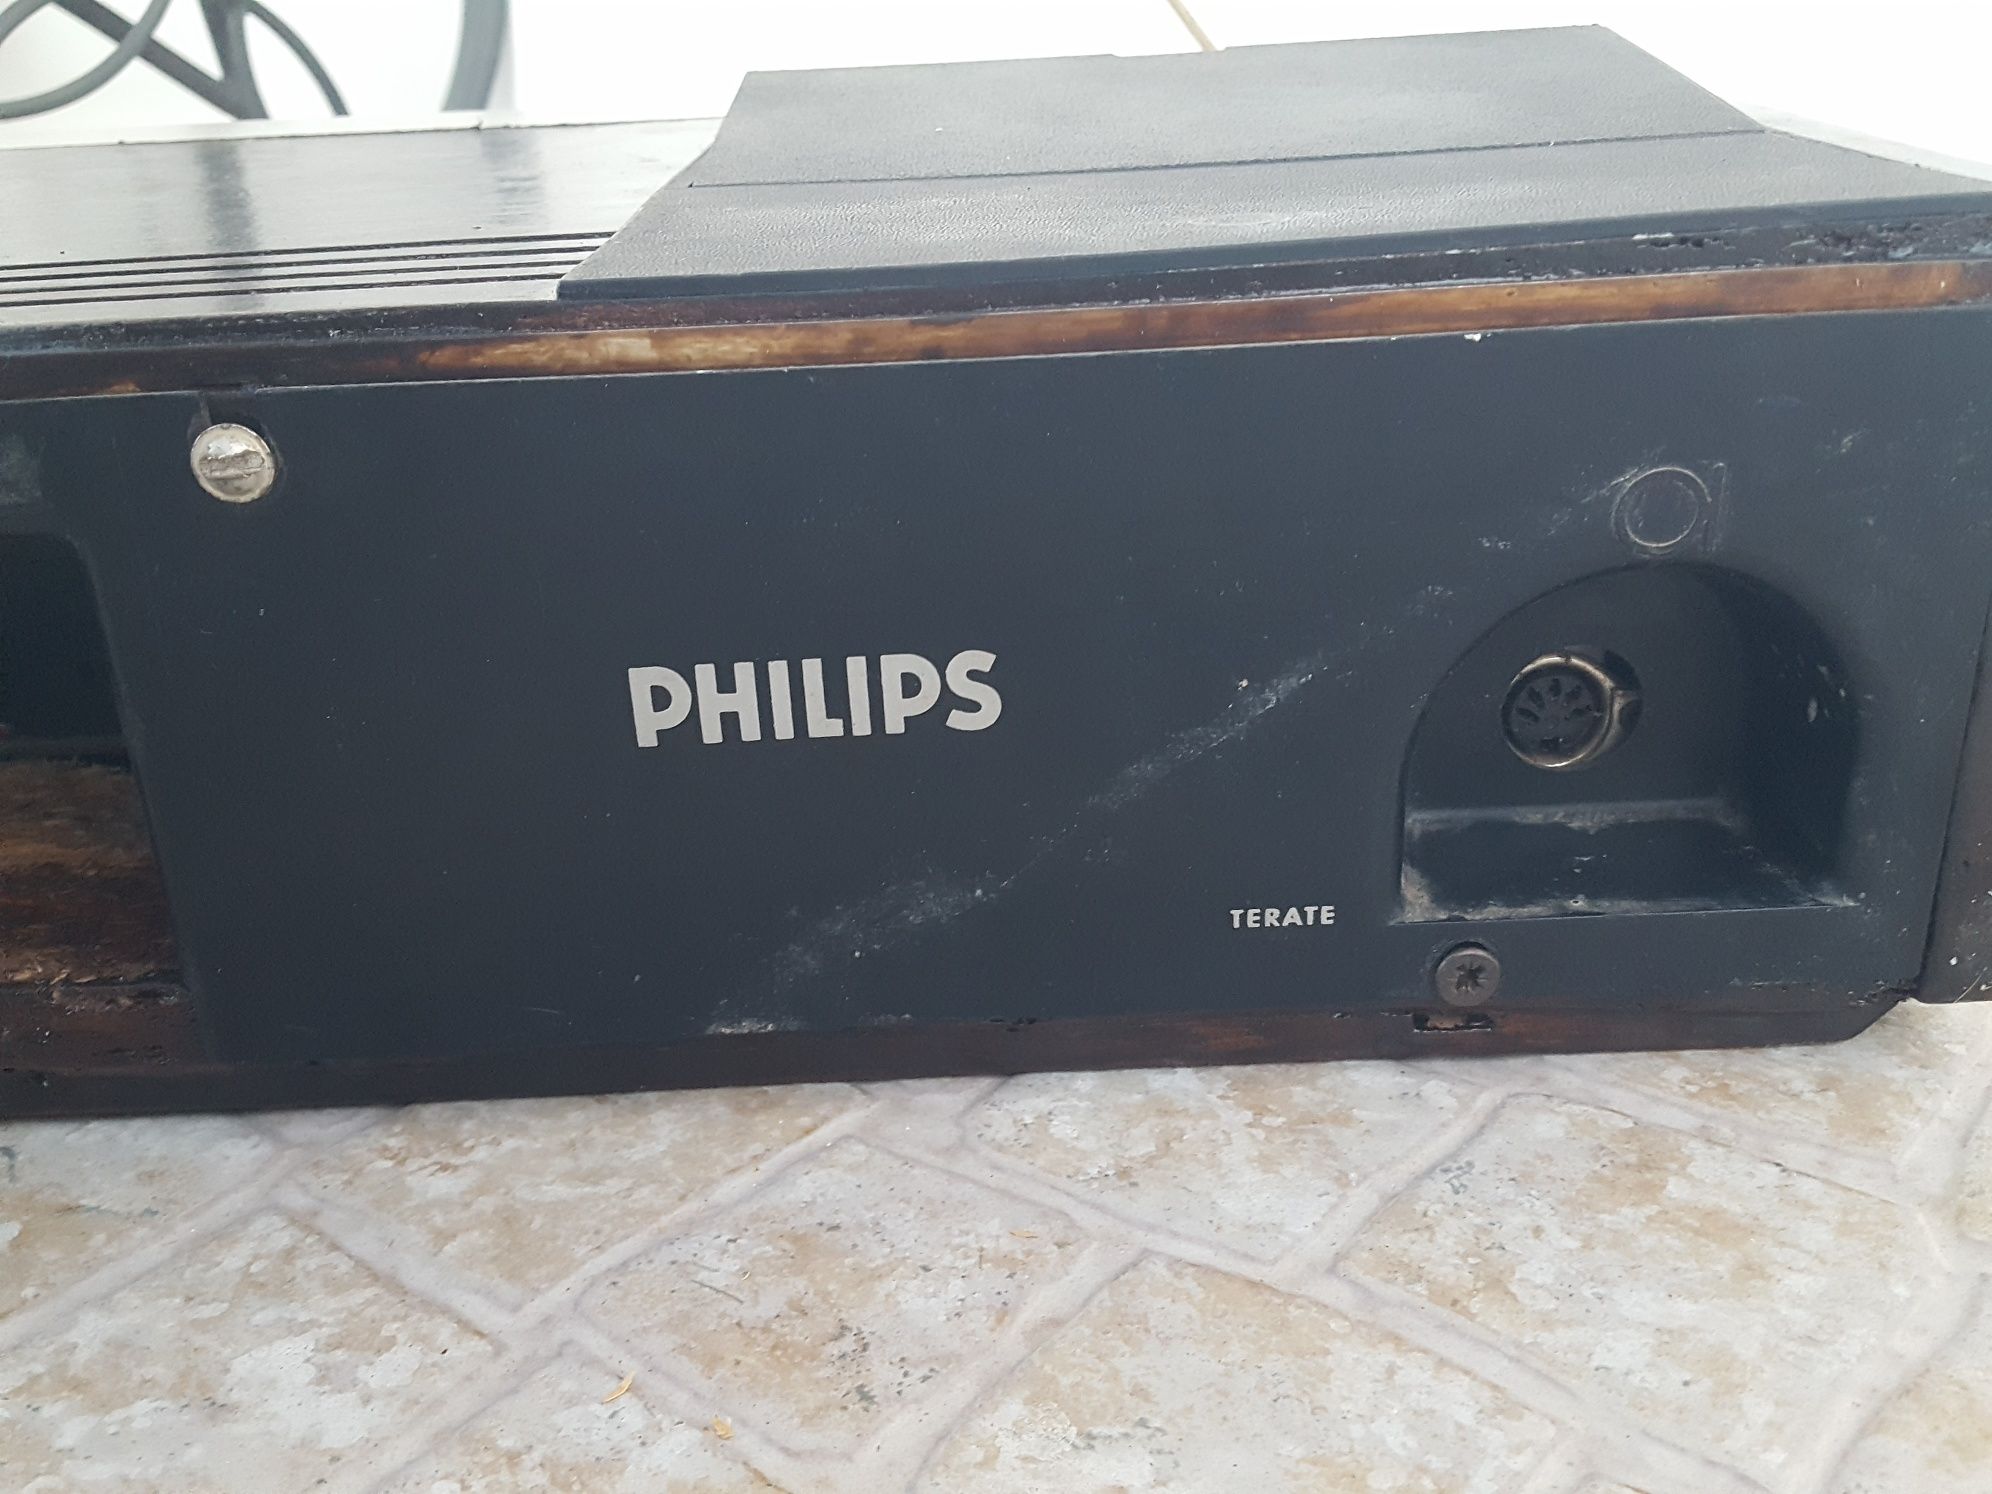 Philips 22RH881/73  stereo receiver